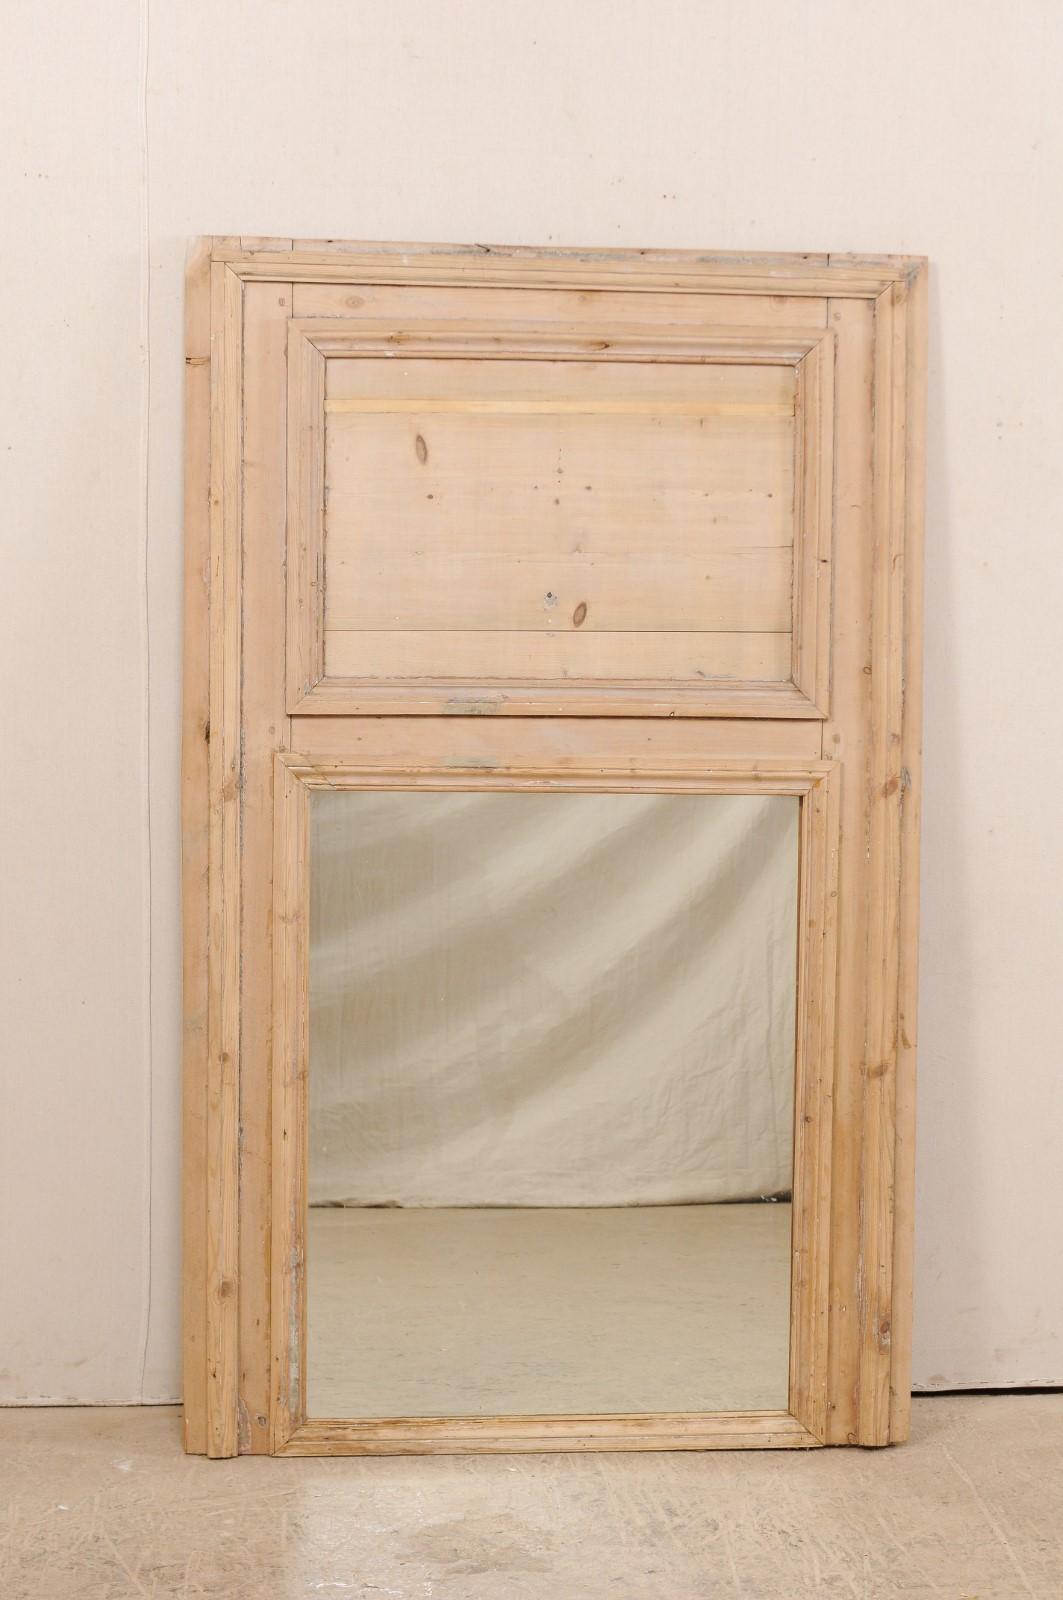 A French wooden trumeau mirror from the 19th century. This antique mirror from France features a vertical rectangular-shape with straight-line trim molding, with typical trumeau design of wooden plaque-style top over mirror below. It stands just